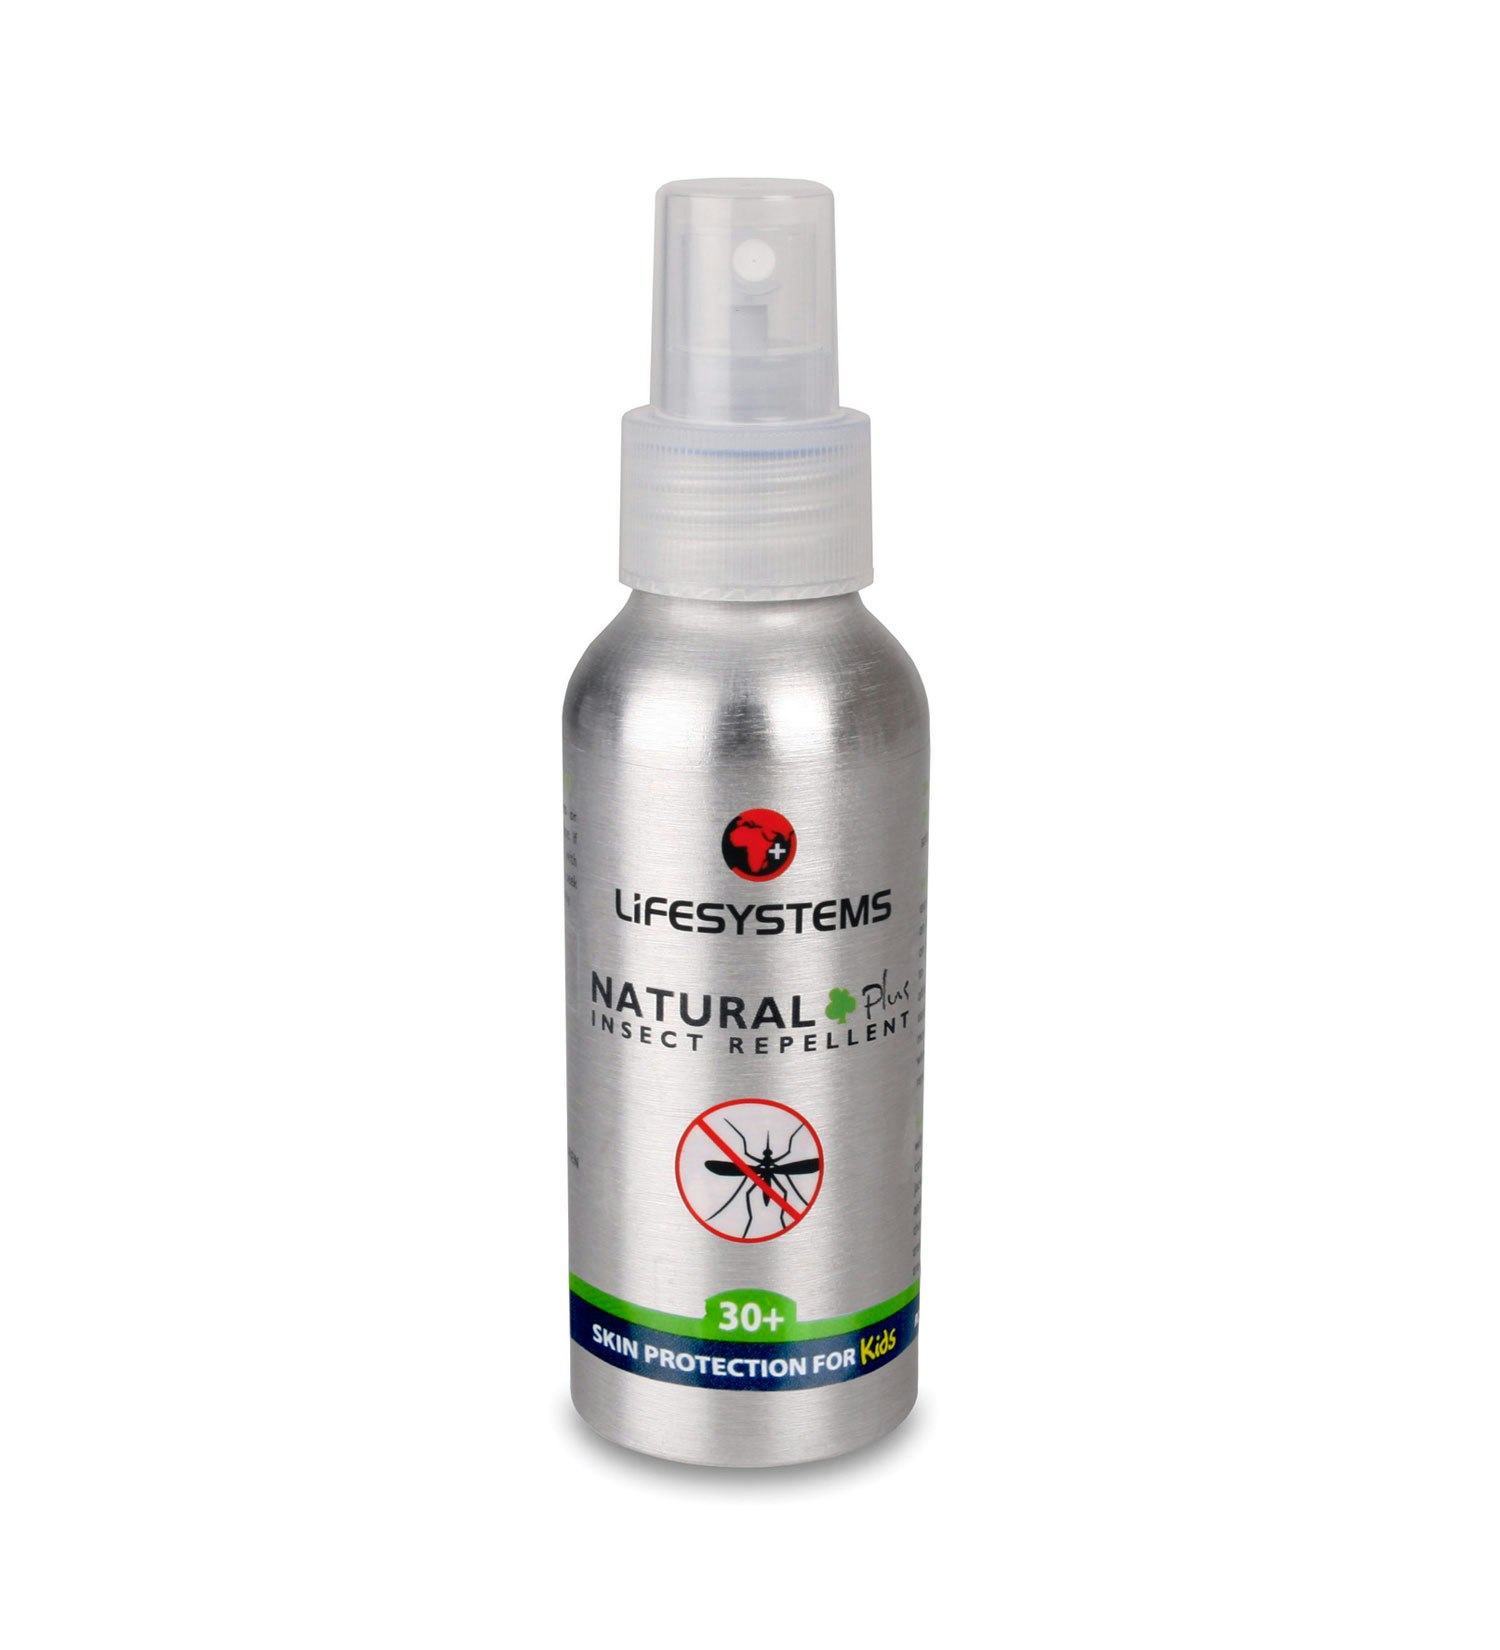 Lifesystems Natural 30+ Insect Repellent Spray 100ml